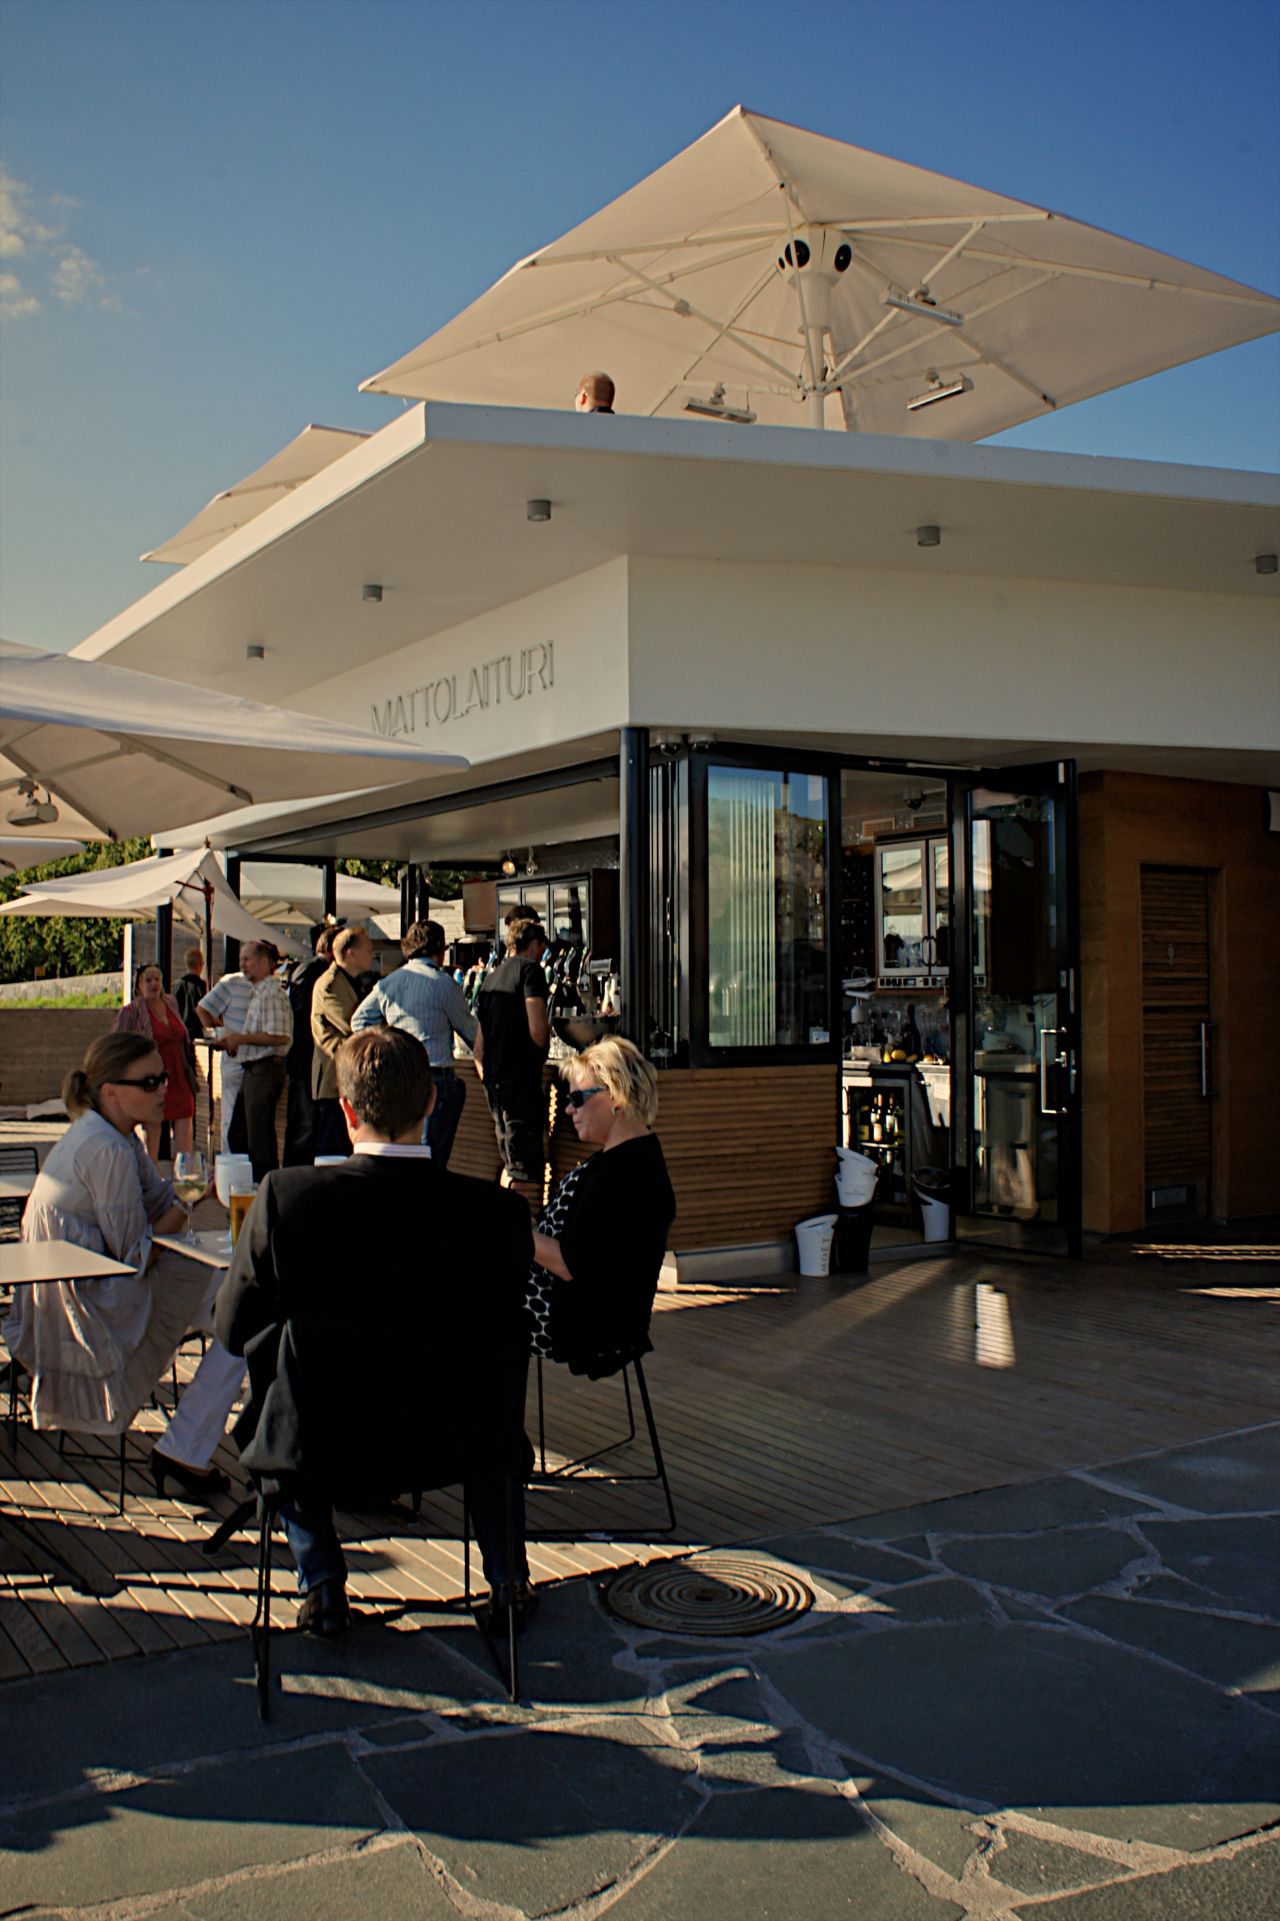 This <a href="http://www.mattolaituri.com/" target="_blank" target="_blank">cafe</a> has become one of the most popular spots along the seafront for a coffee break and for drinks on warm summer evenings. It opened last year and embodies the innovative attitude of the new city planning department.